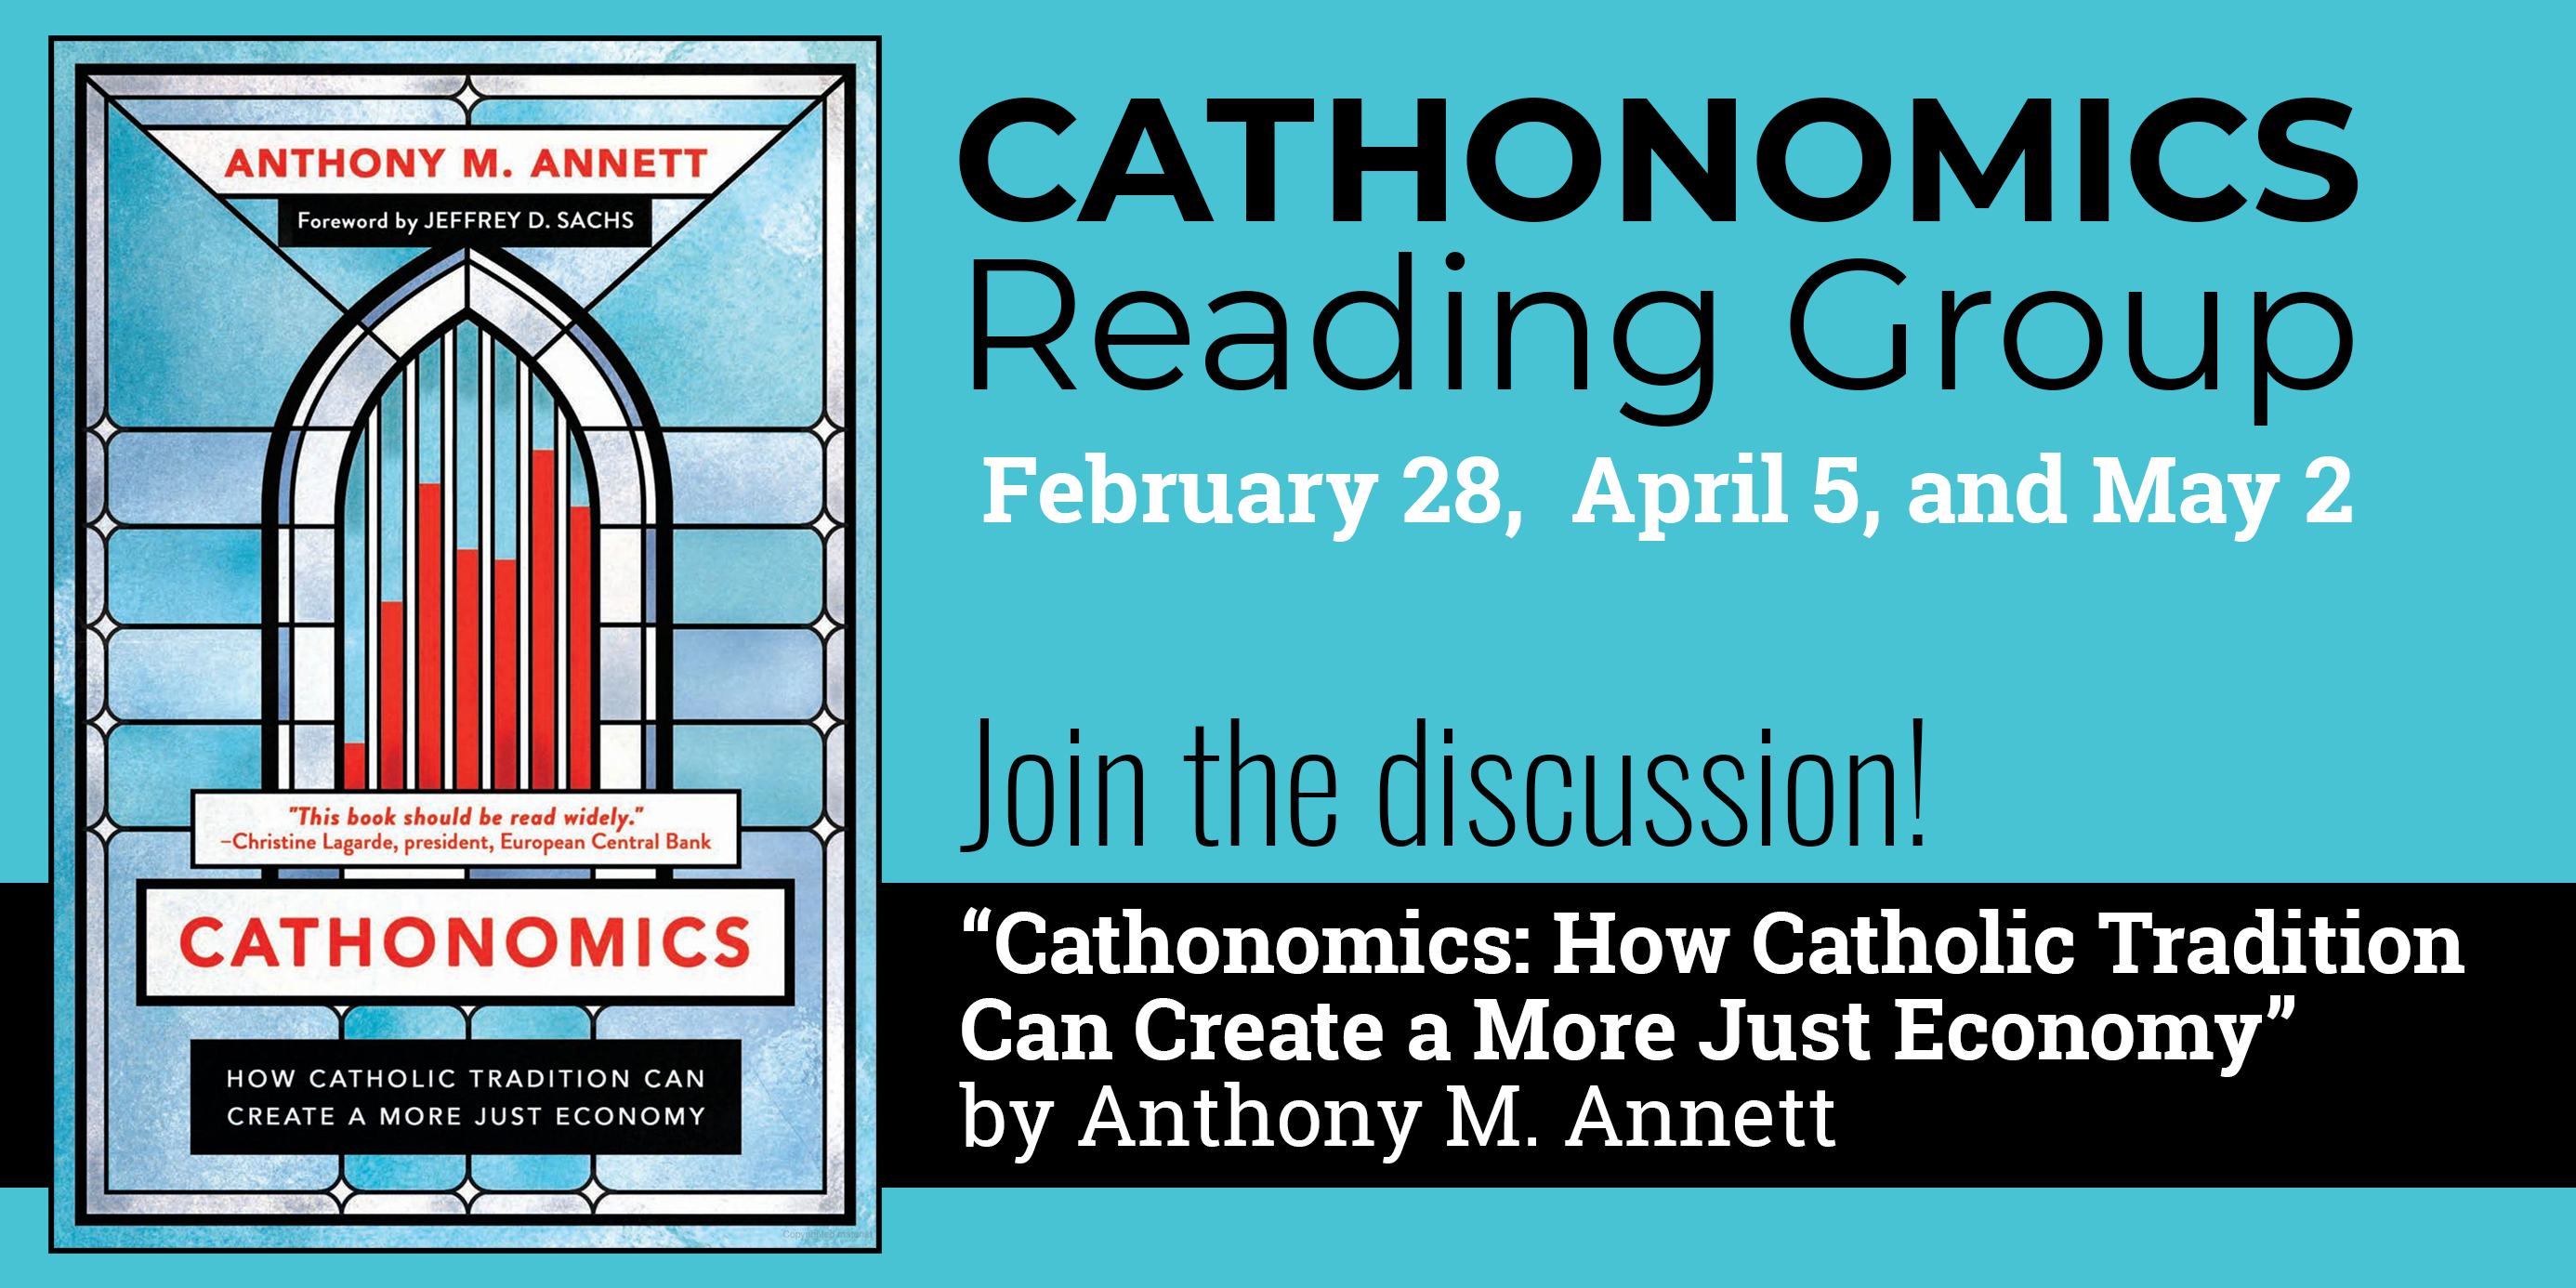 Promotional flyer of Cathonomics Reading Group. On the left, there is the cover of the book Cathonomics by Anthony M Annett. On the right, there is information about the event. This information is the same as the following: